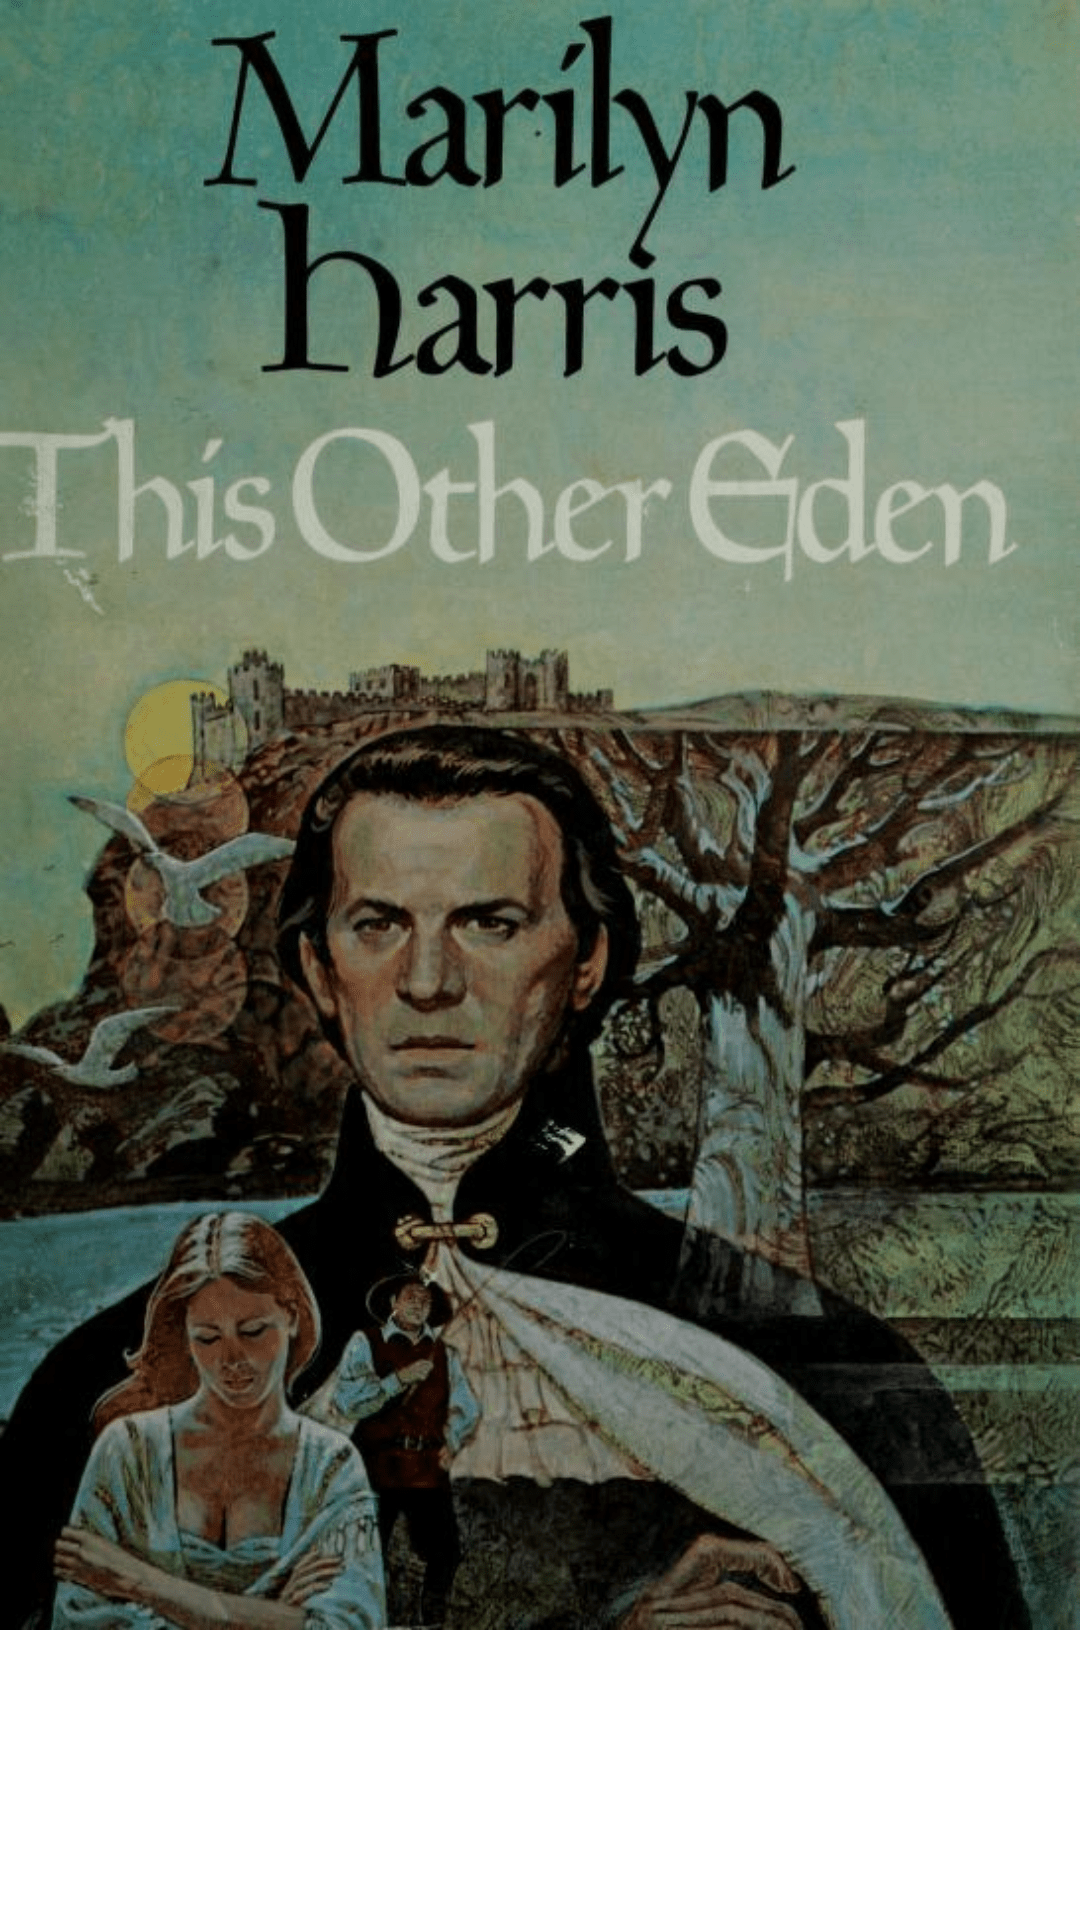 This Other Eden by Marilyn Harris